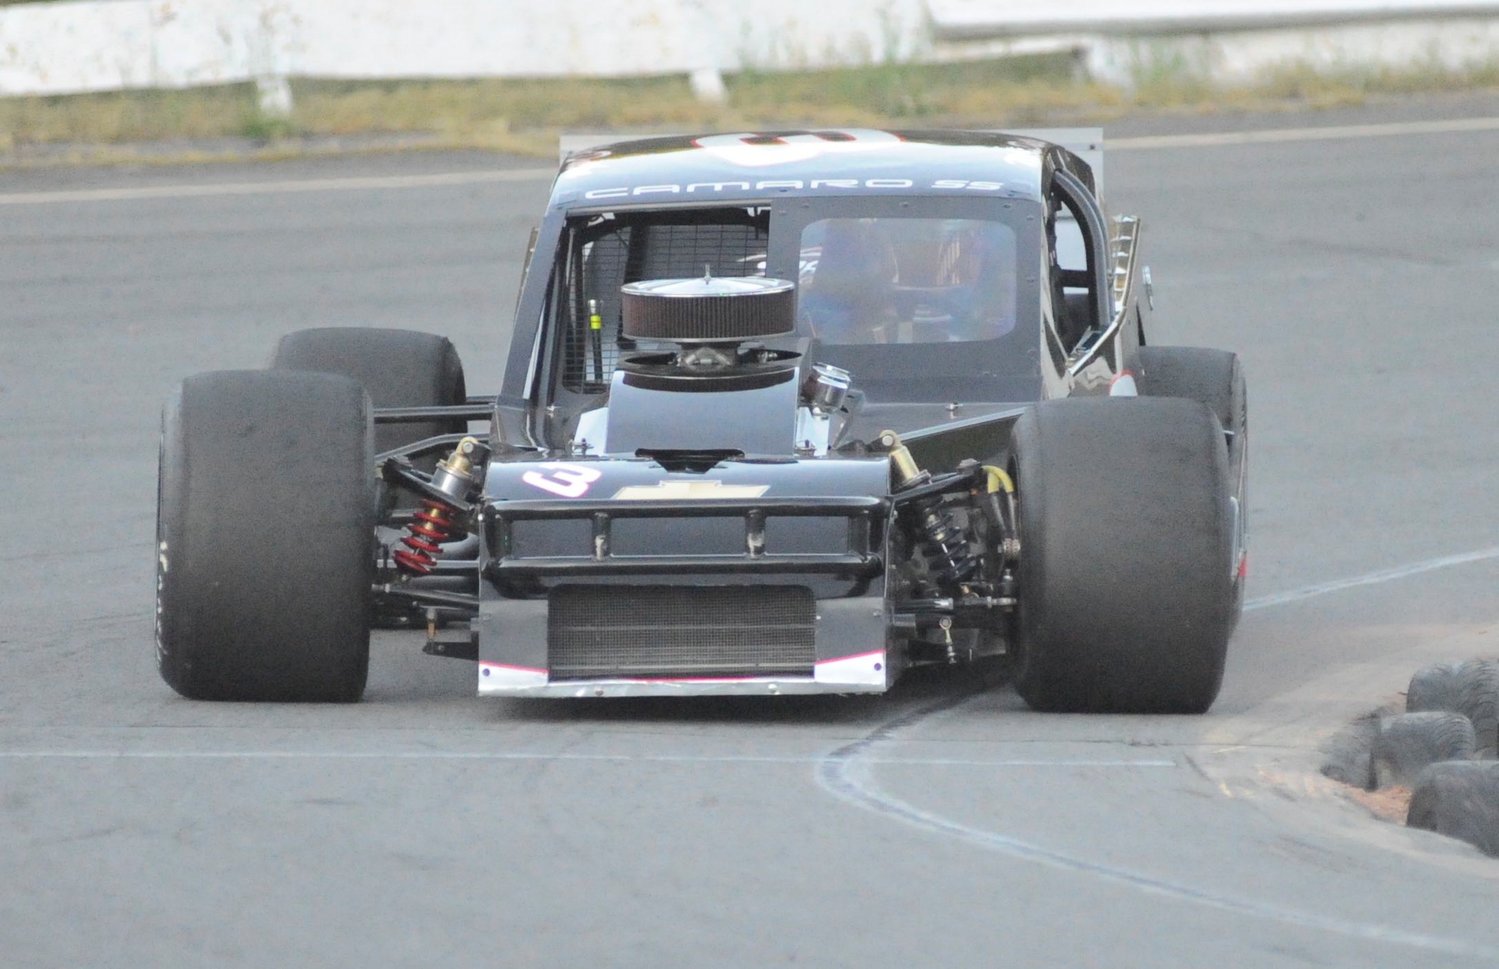 “Batmobile” Mike Dutka set a new course lap record for Bethel Sports Mods on June 13 with a time of 13.6, breaking the previous record of 13.8.